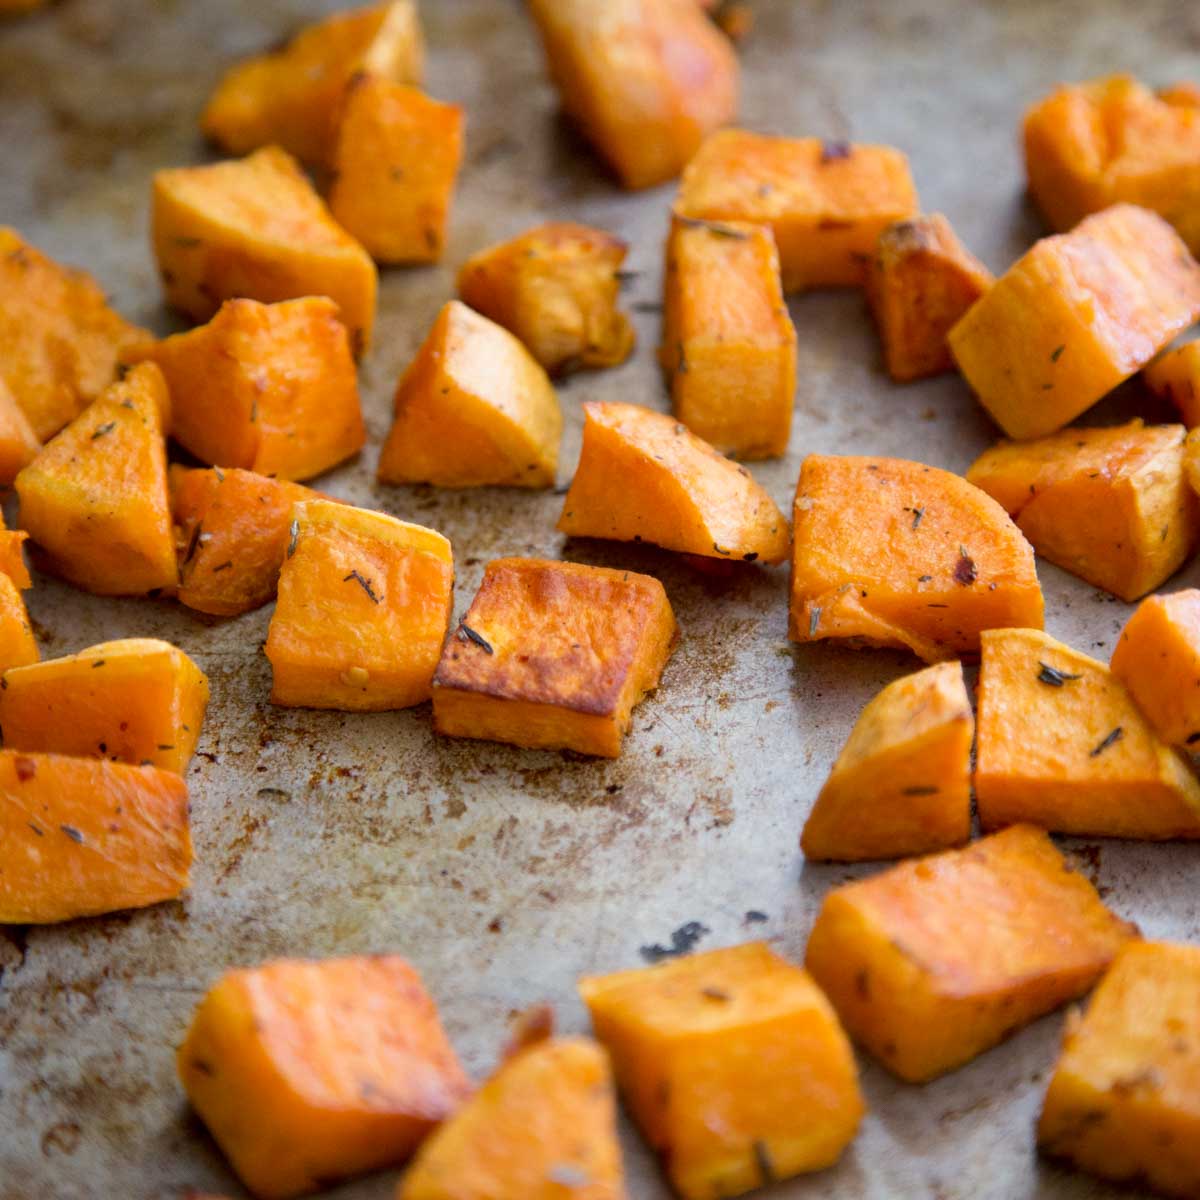 A metal baking sheet has chopped and roasted sweet potatoes scattered on it.